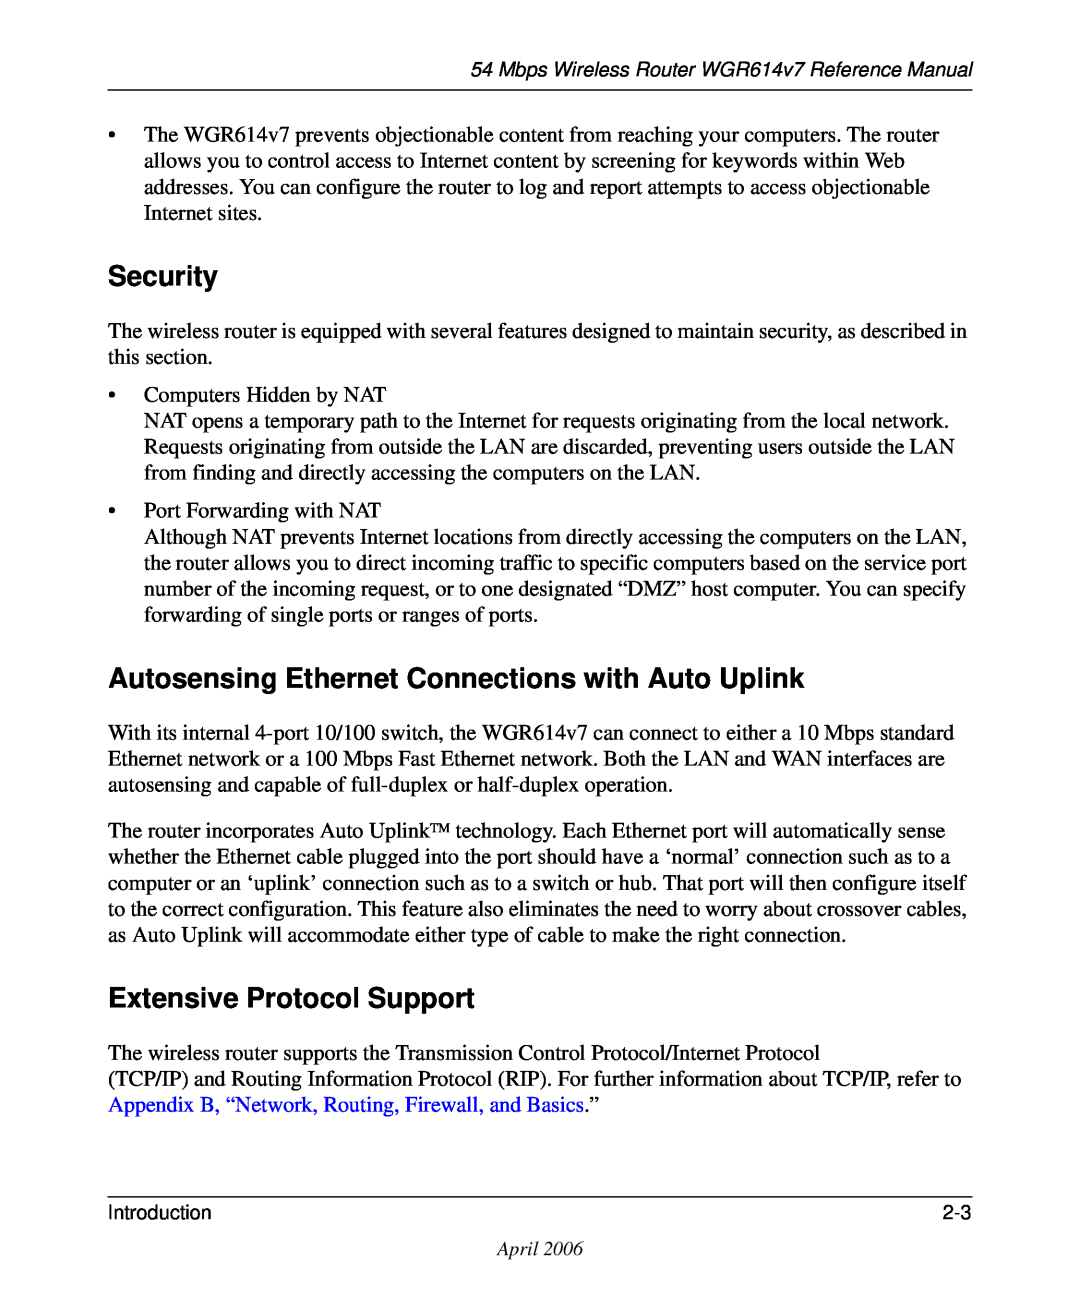 NETGEAR WGR614v7 manual Security, Autosensing Ethernet Connections with Auto Uplink, Extensive Protocol Support 